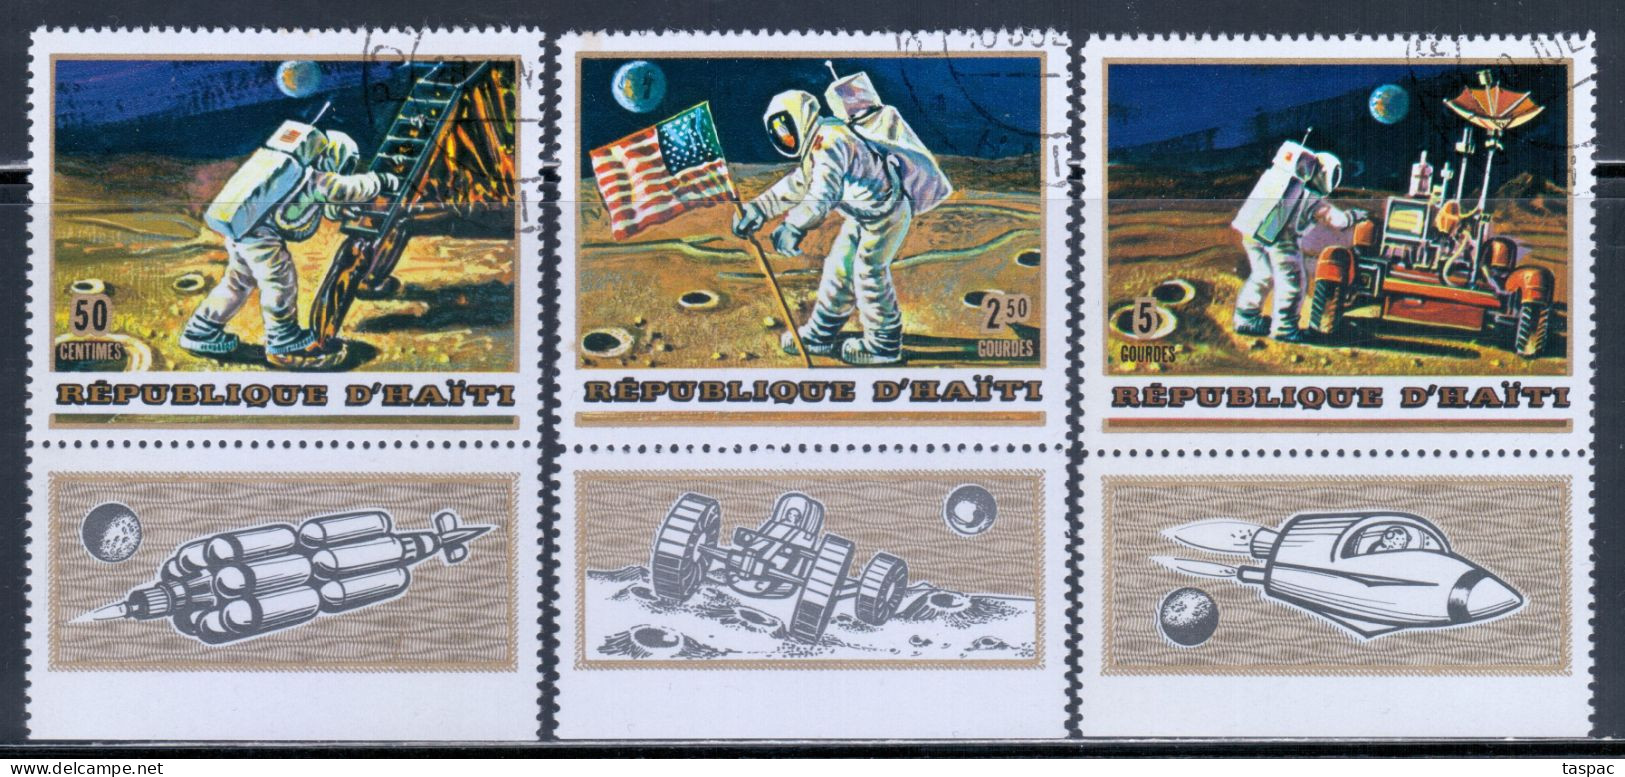 Haiti 1973 Mi# Not Listed - Unofficial Set Of 3 Used - With Ill. Margins - Apollo / Space - América Del Norte